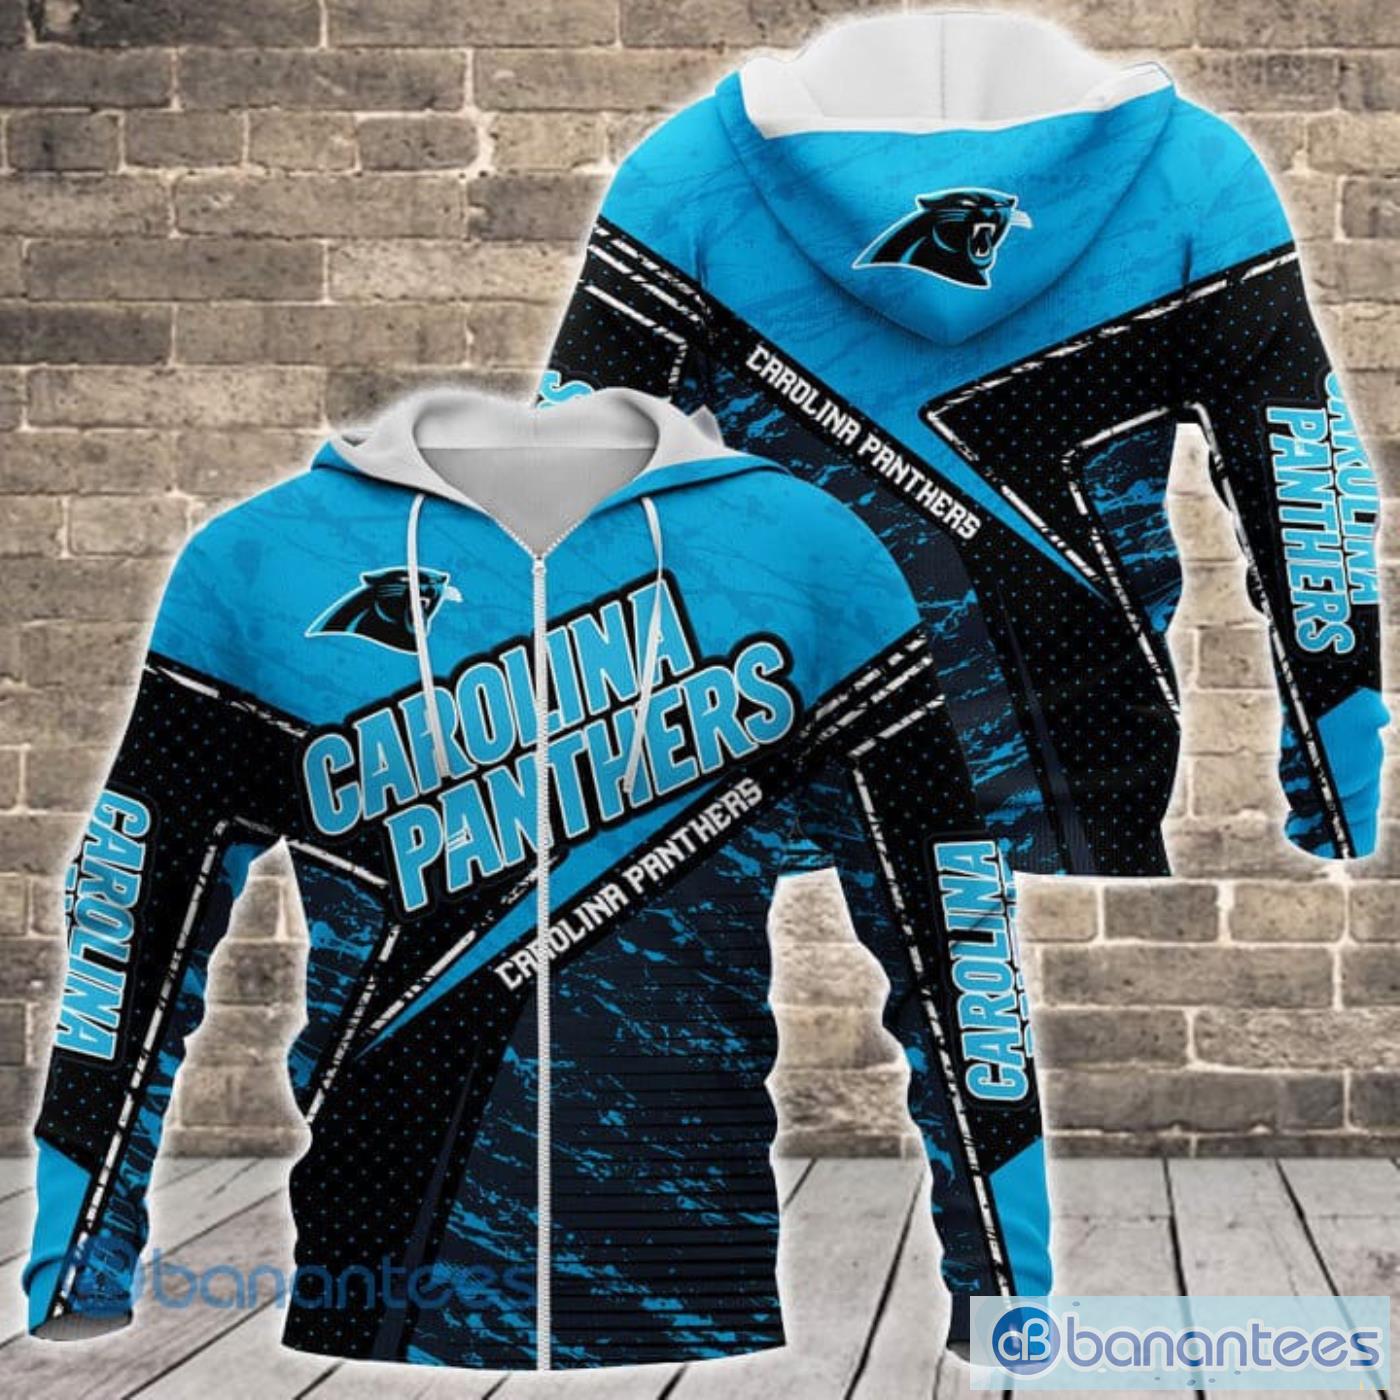 Carolina Panthers Nfl All Over Printed 3D Shirt For Fans Product Photo 4